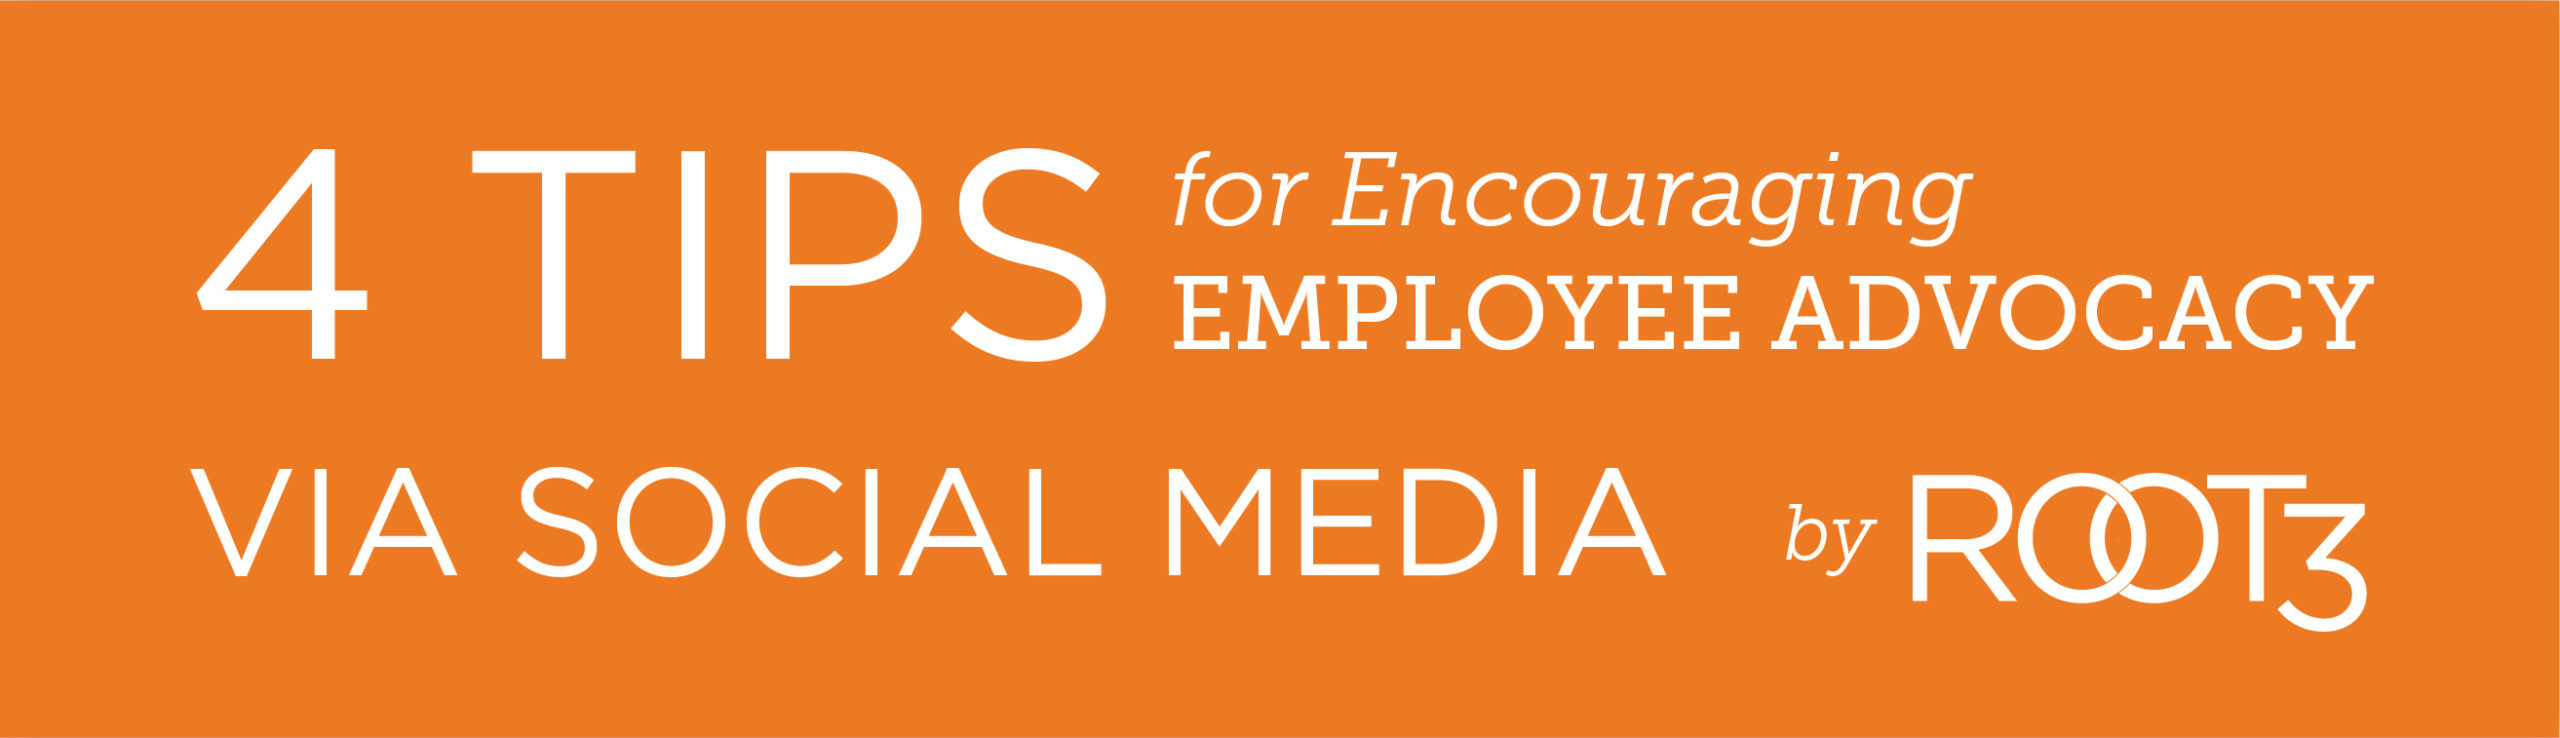 4 Tips for encouraging employee advocacy image long